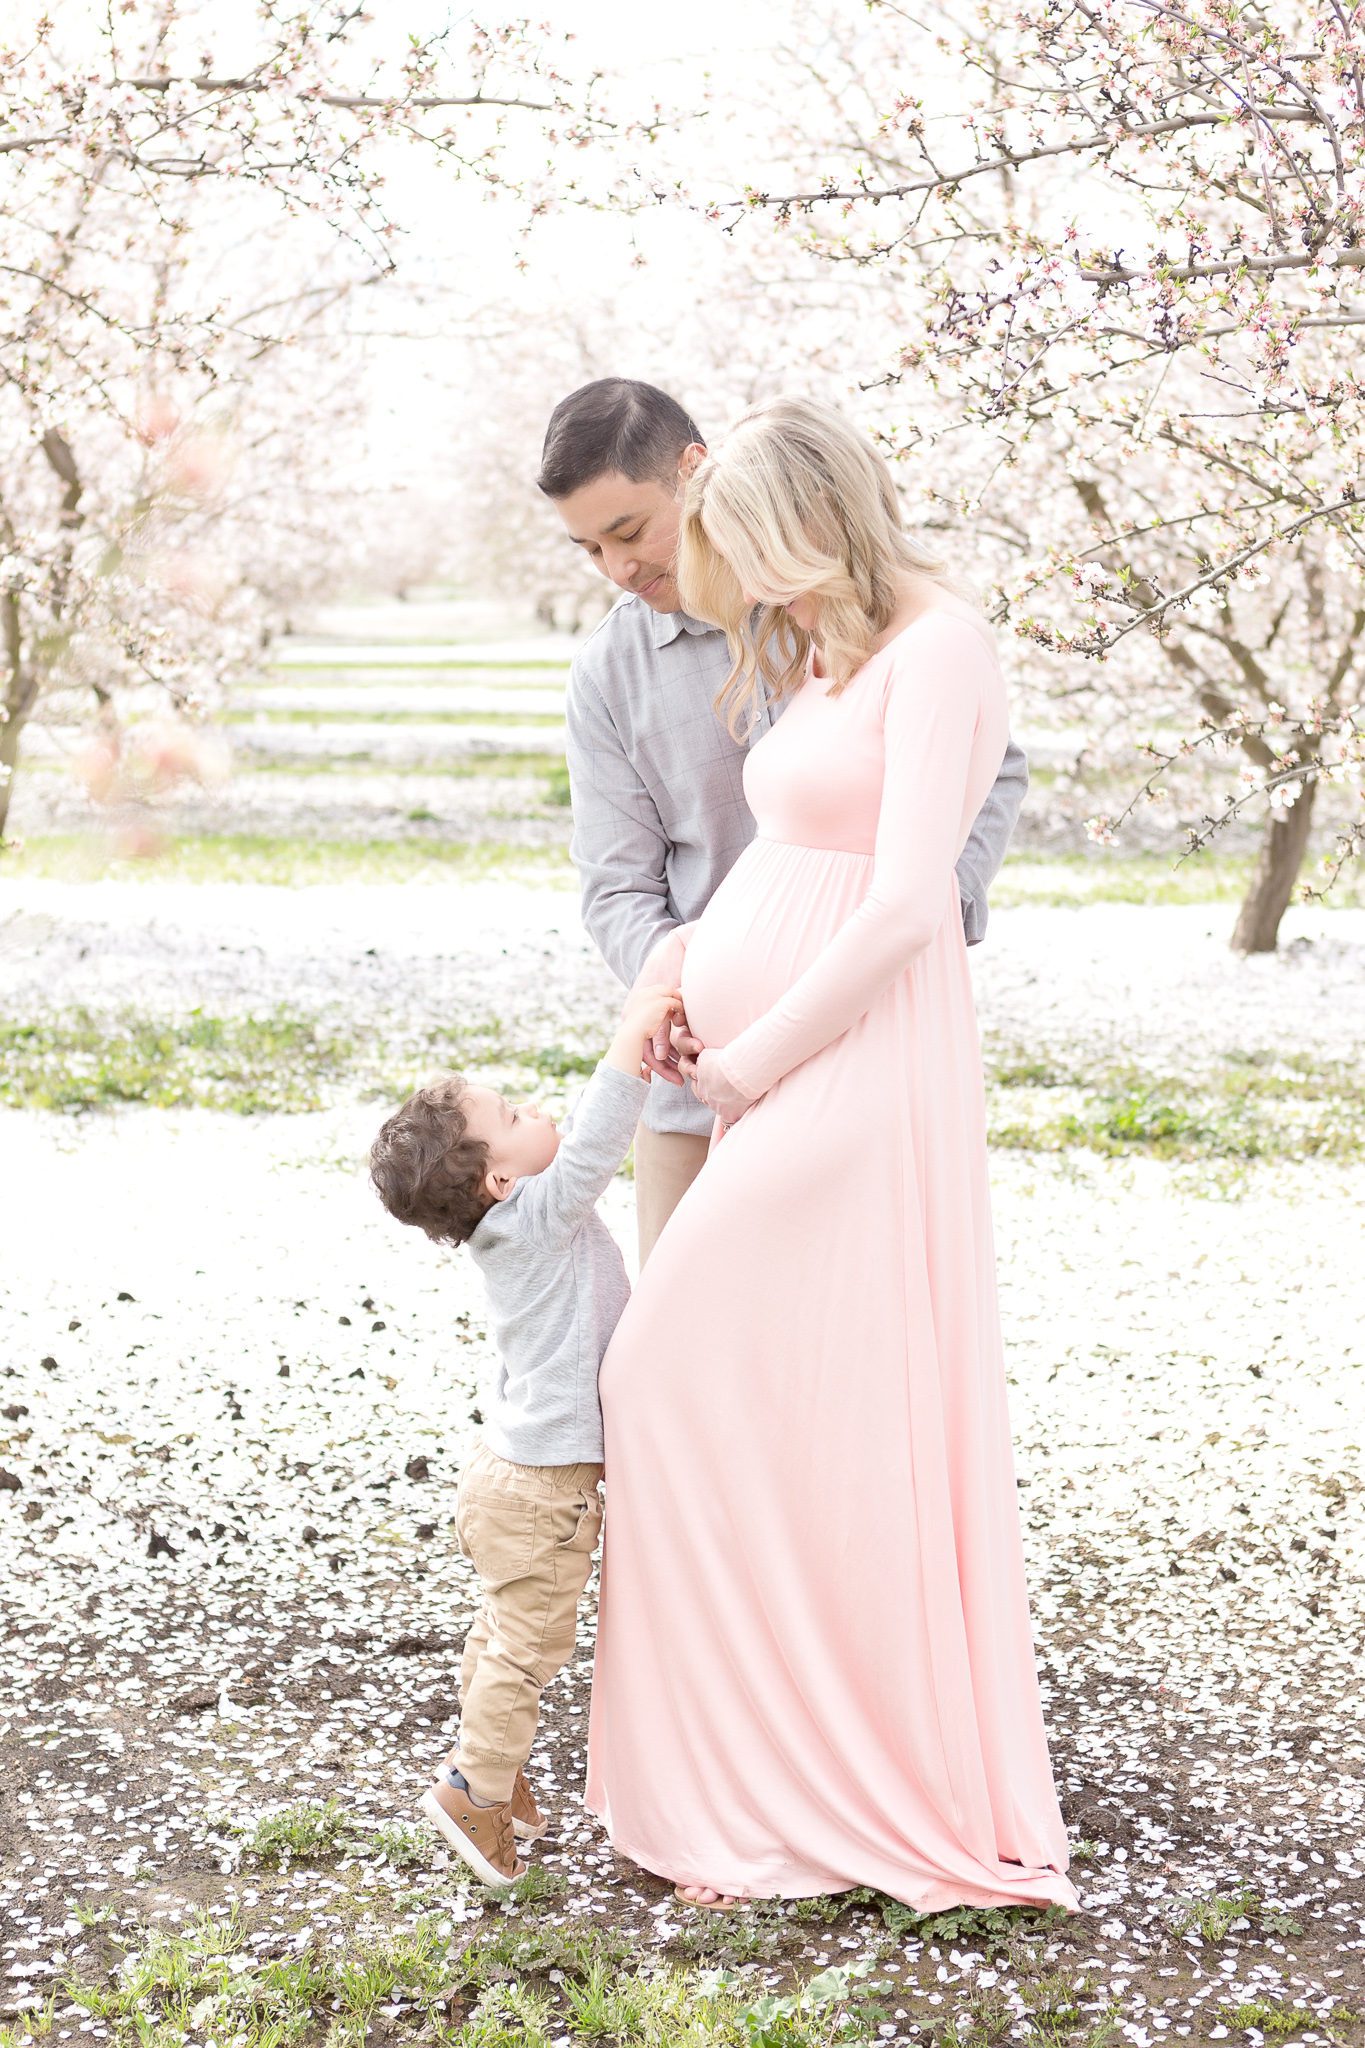 blossom maternity session, little boy looking up at mom and dad, pink dress